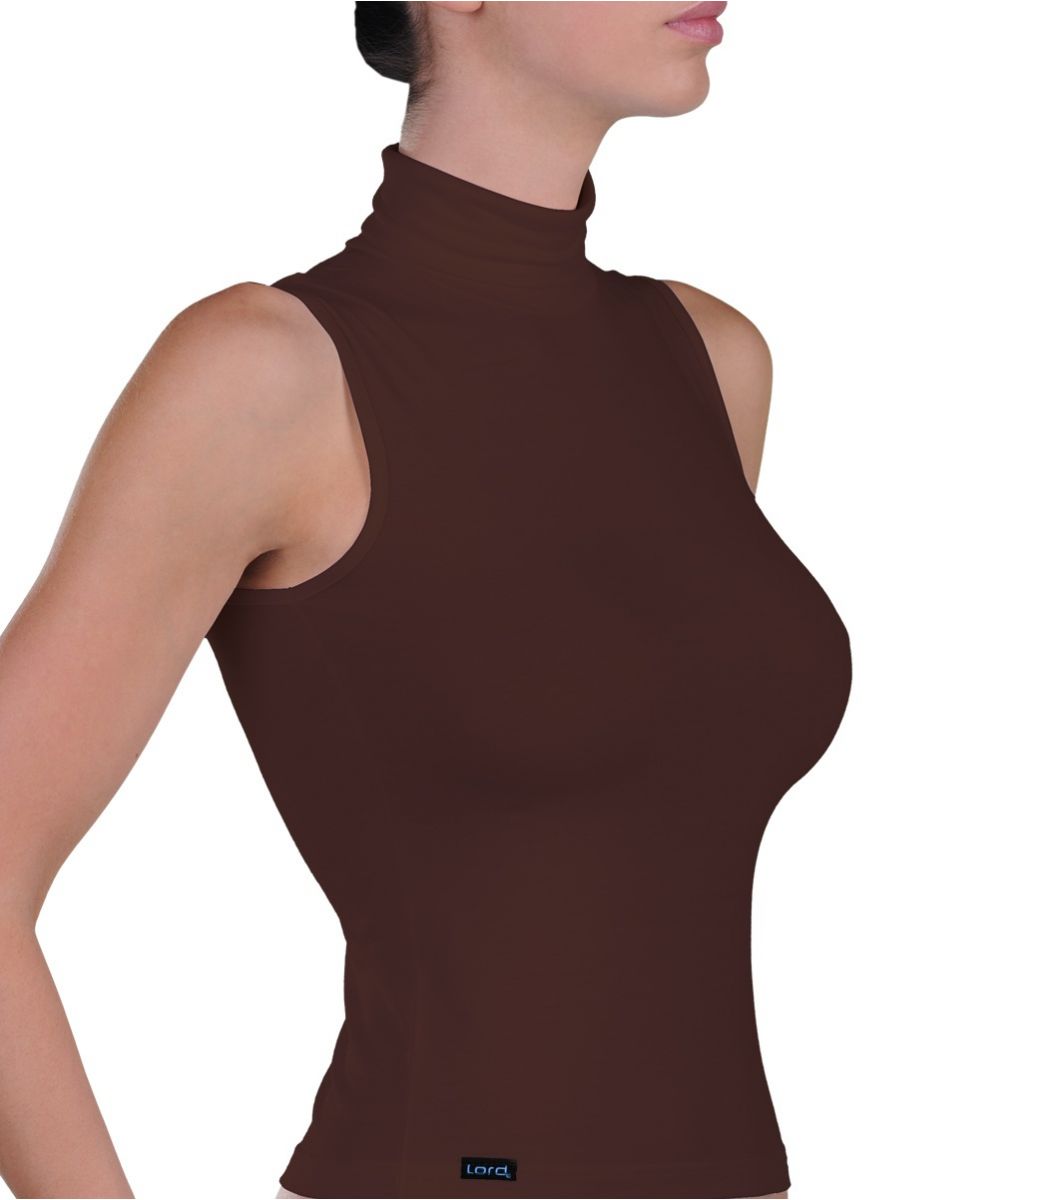 women underwear, sleeveless turtle neck, micromodal Color Brown Size Small